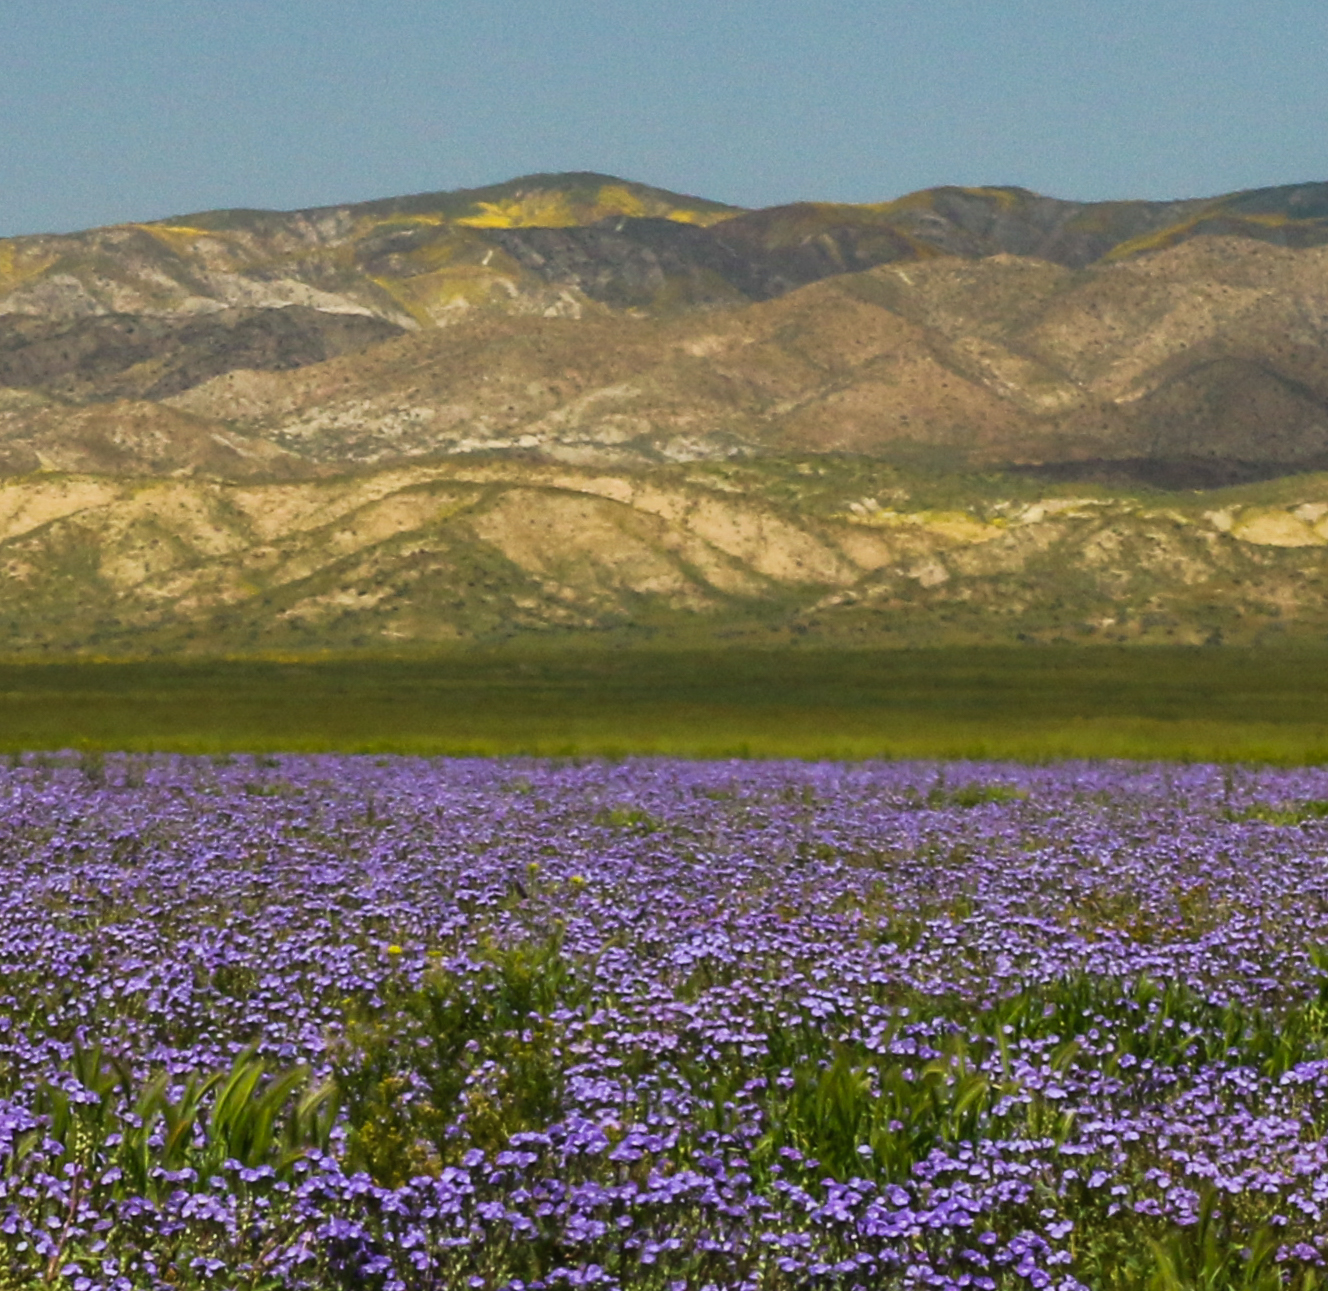 Field of purple flowers with mountains